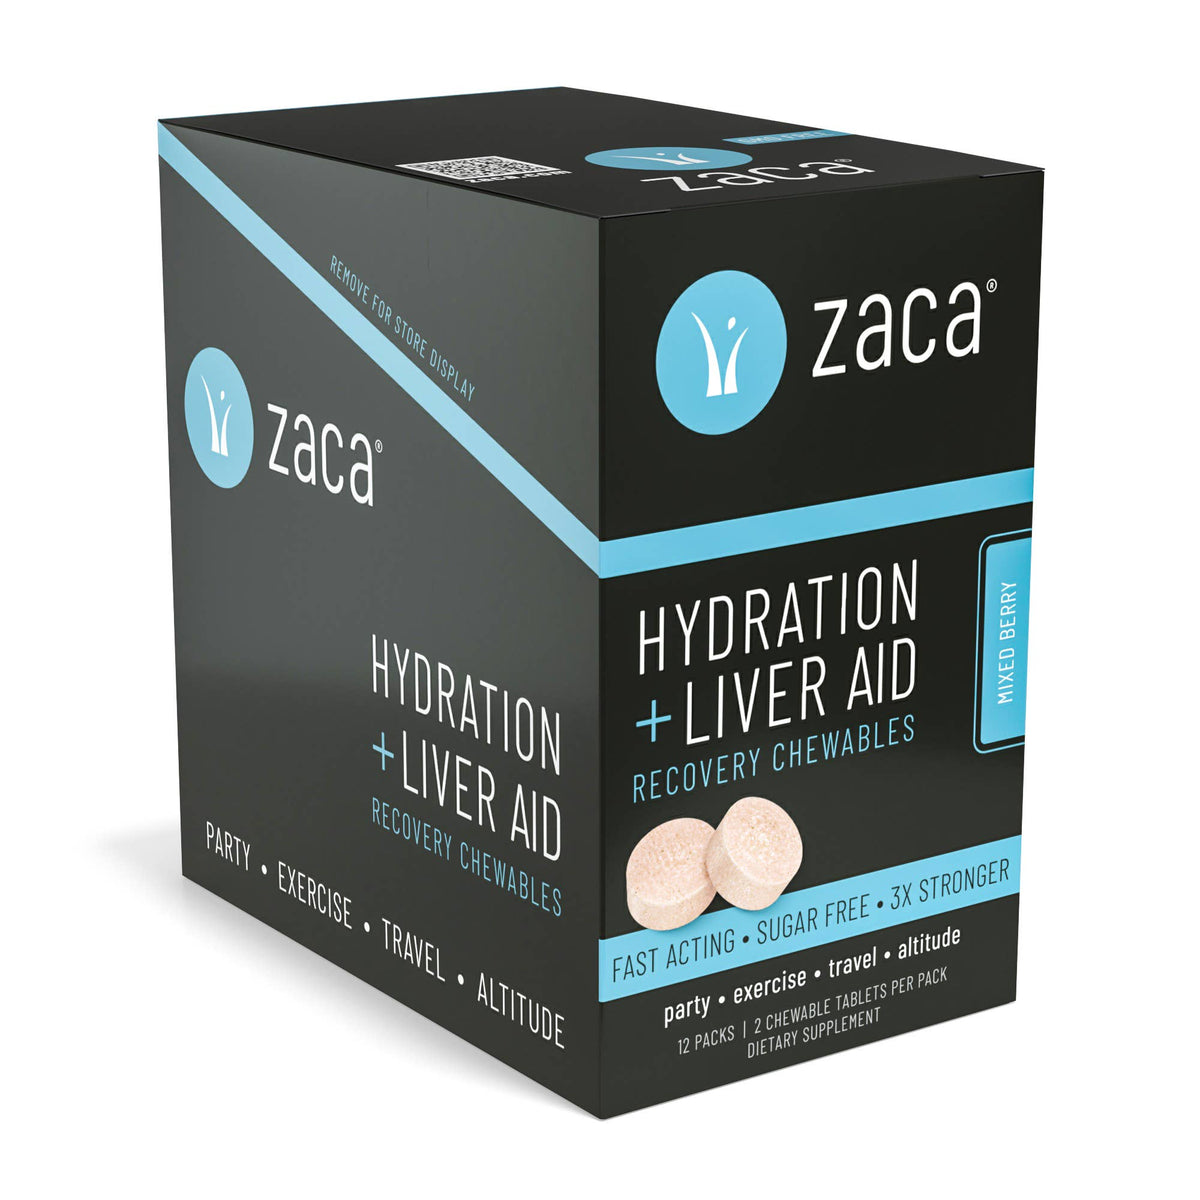 Hydration + Liver Aid Chewables - Mixed Berry